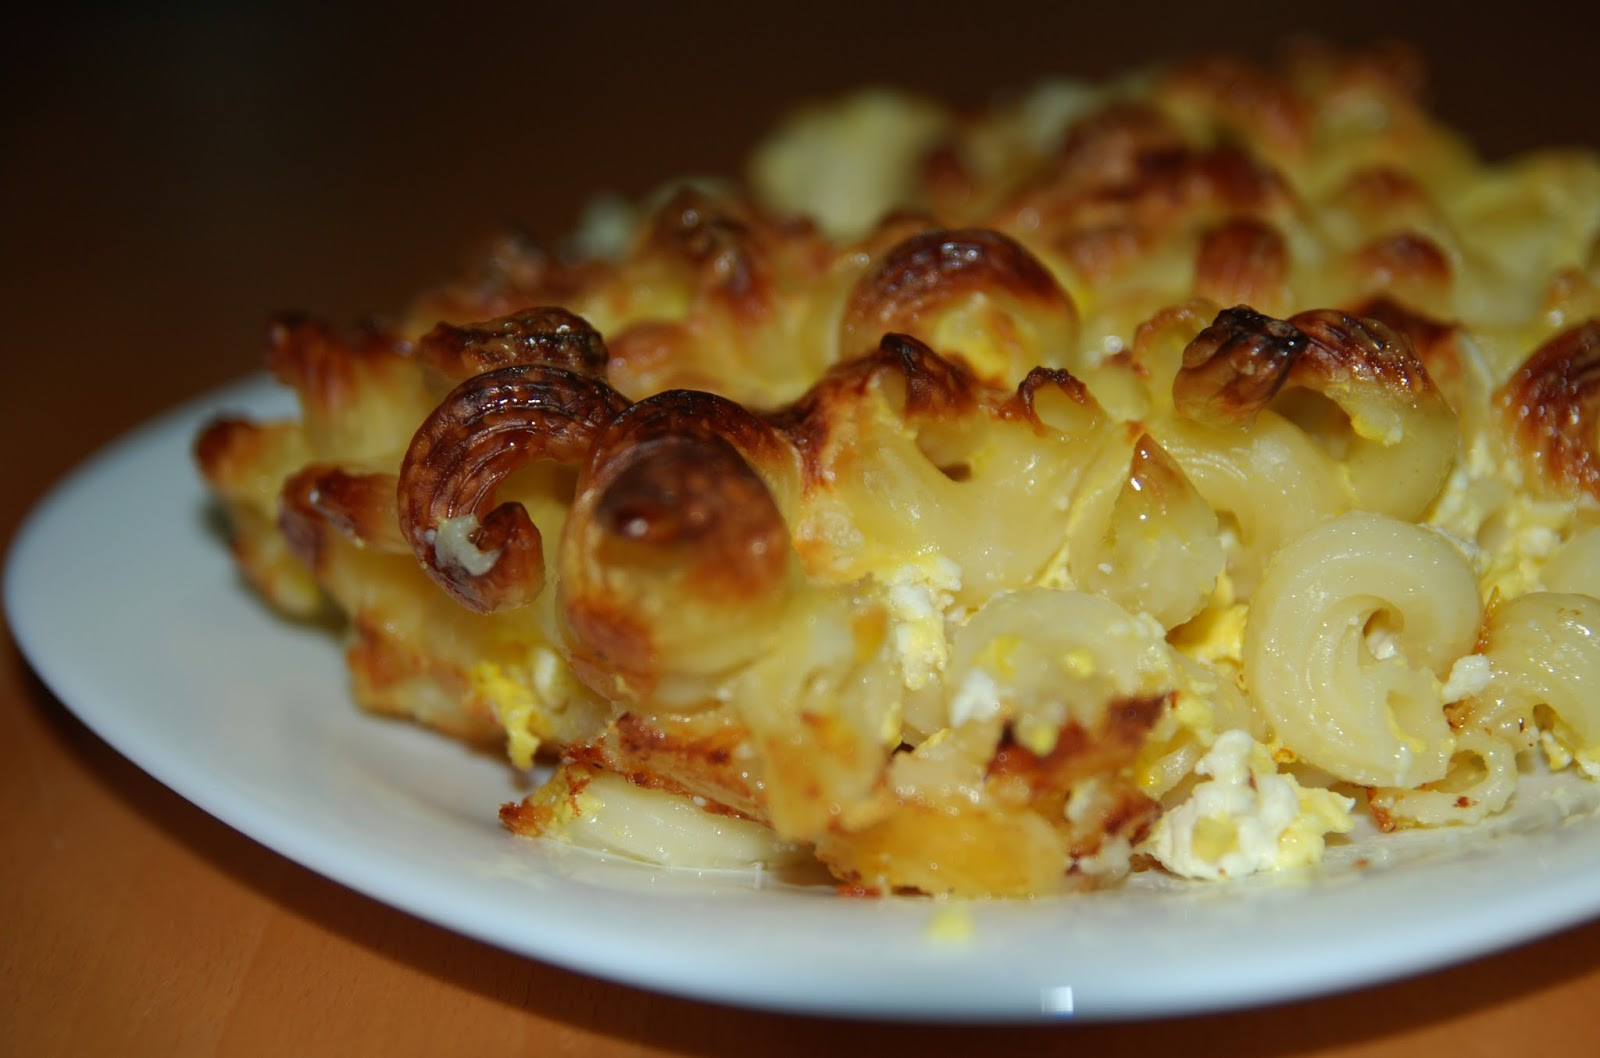 Baked Macaroni And Cheese Recipe With Eggs
 QUICK BAKED MACARONI WITH CHEESE AND EGGS Macedonian Cuisine